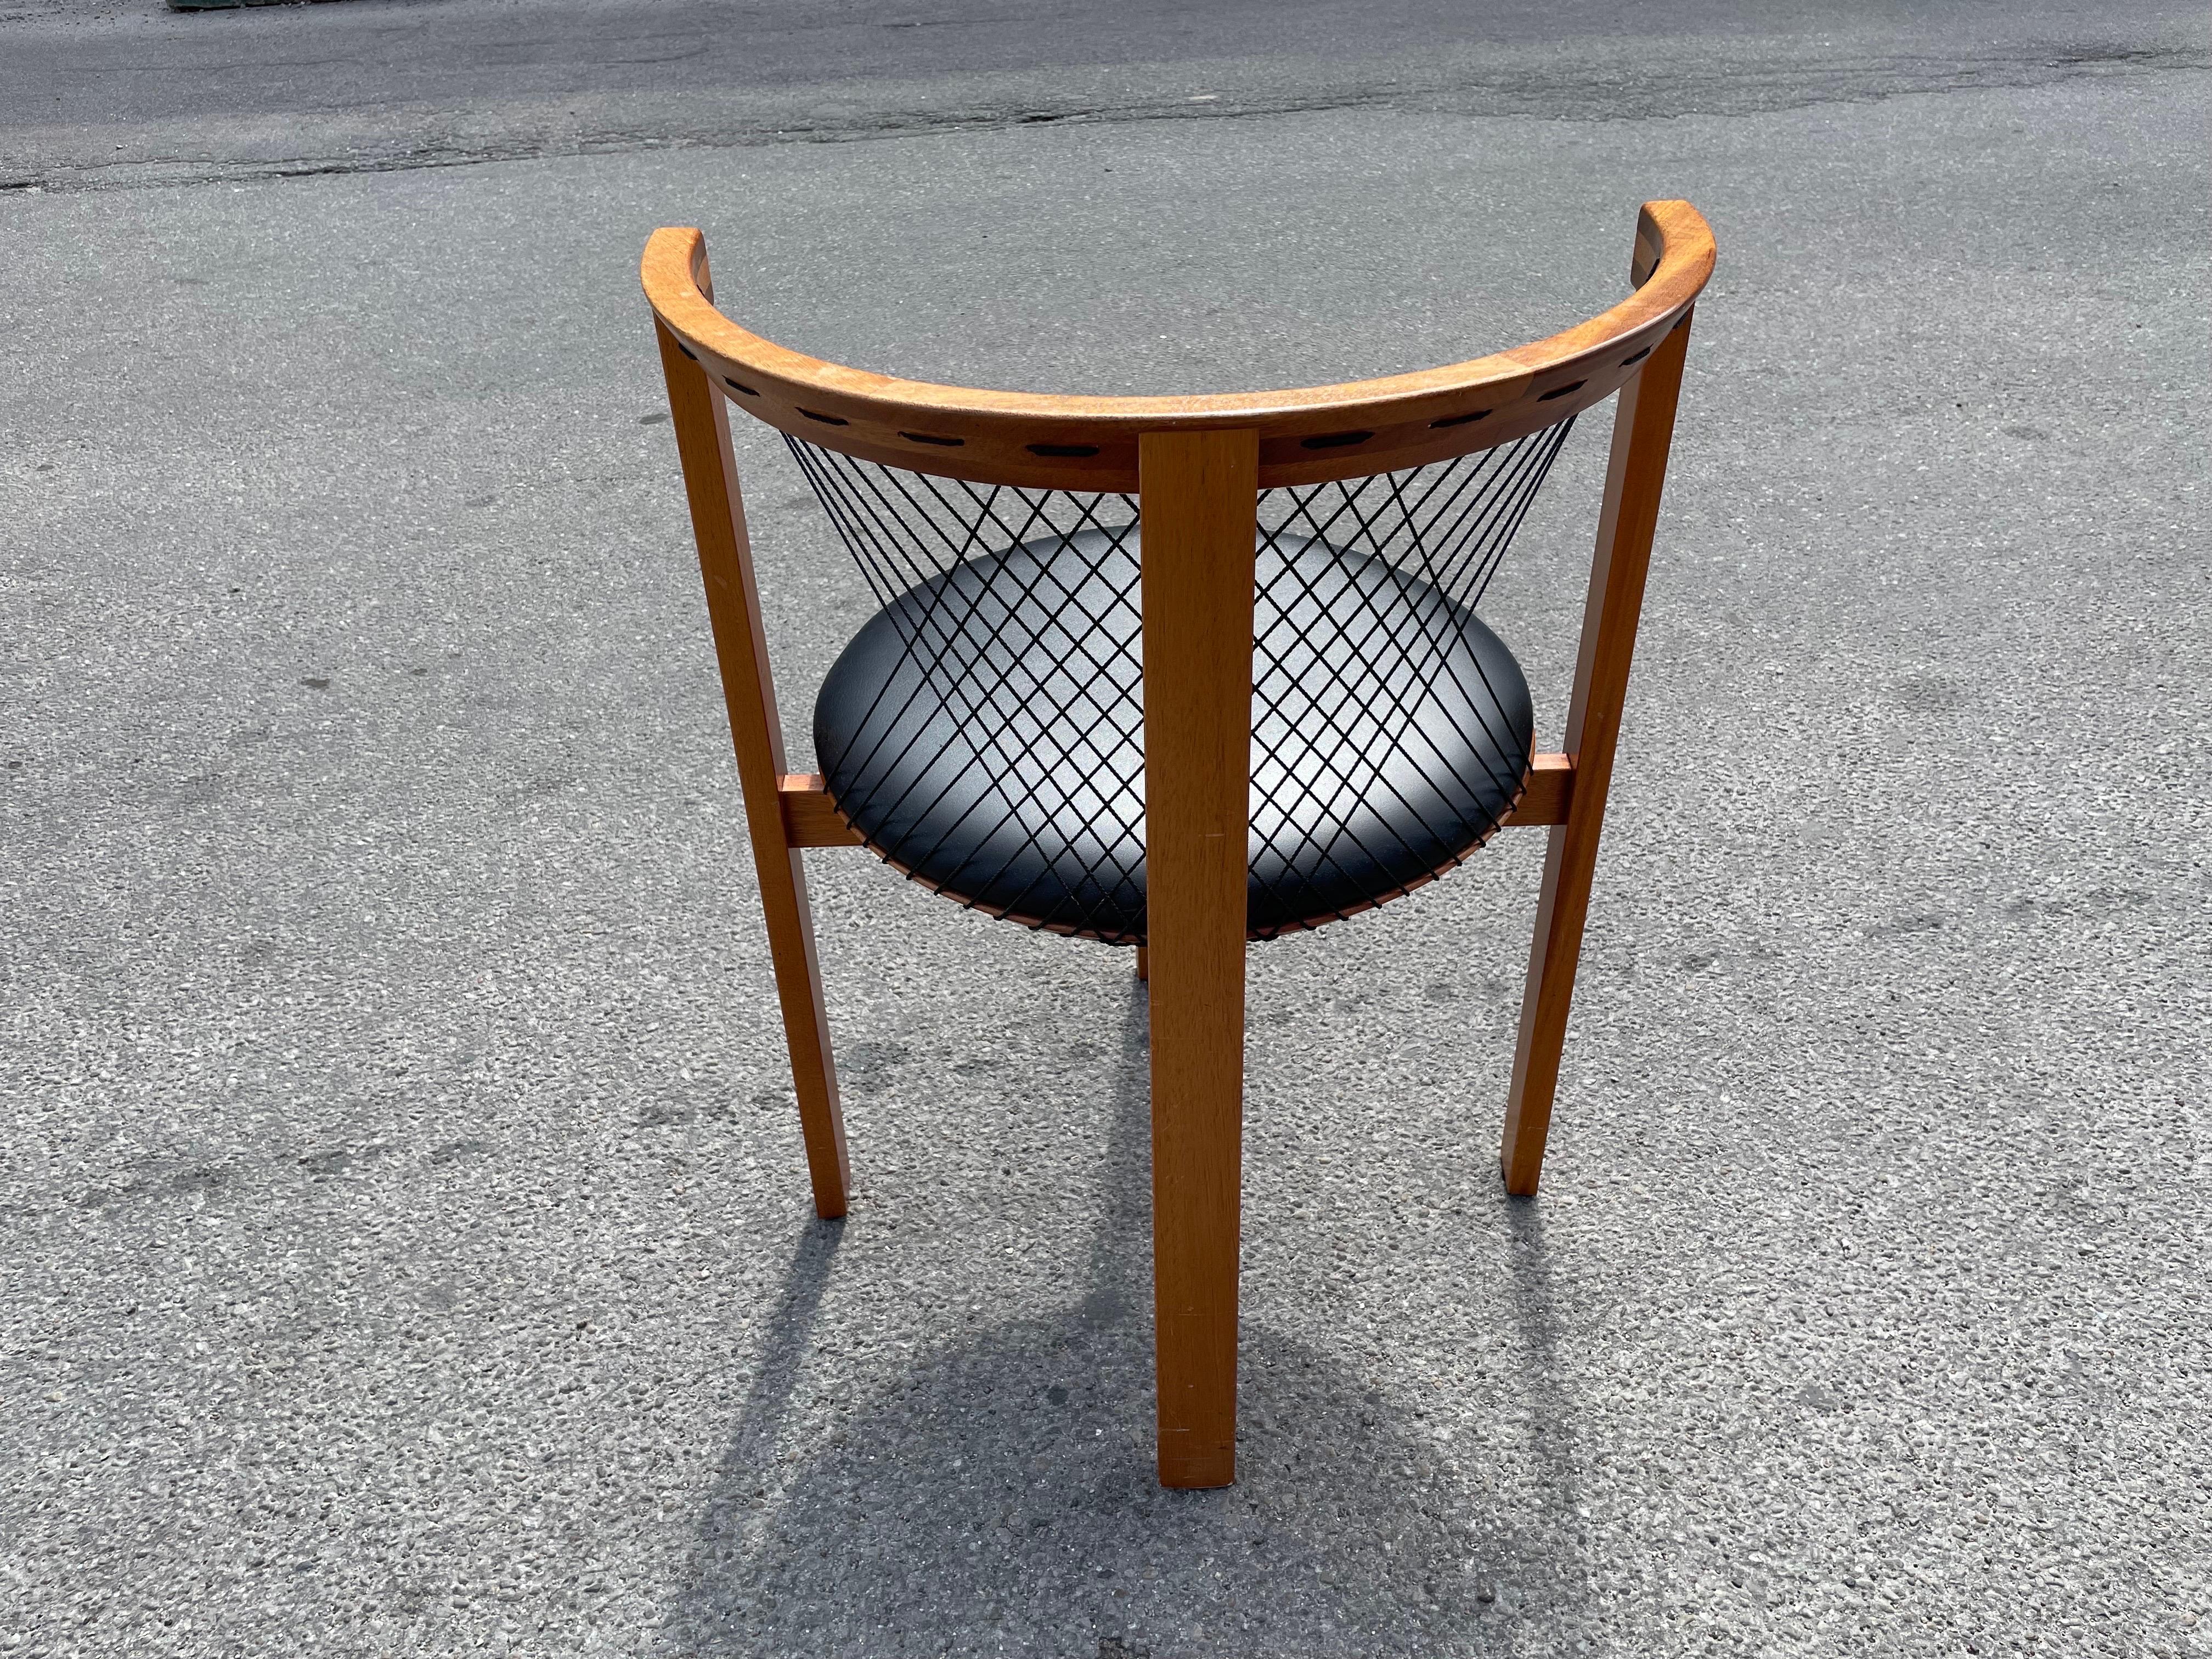 Mahogany 8 String Dining Chairs by Niels Jørgen Haugesen for Tranekaer Denmark, 1970s For Sale